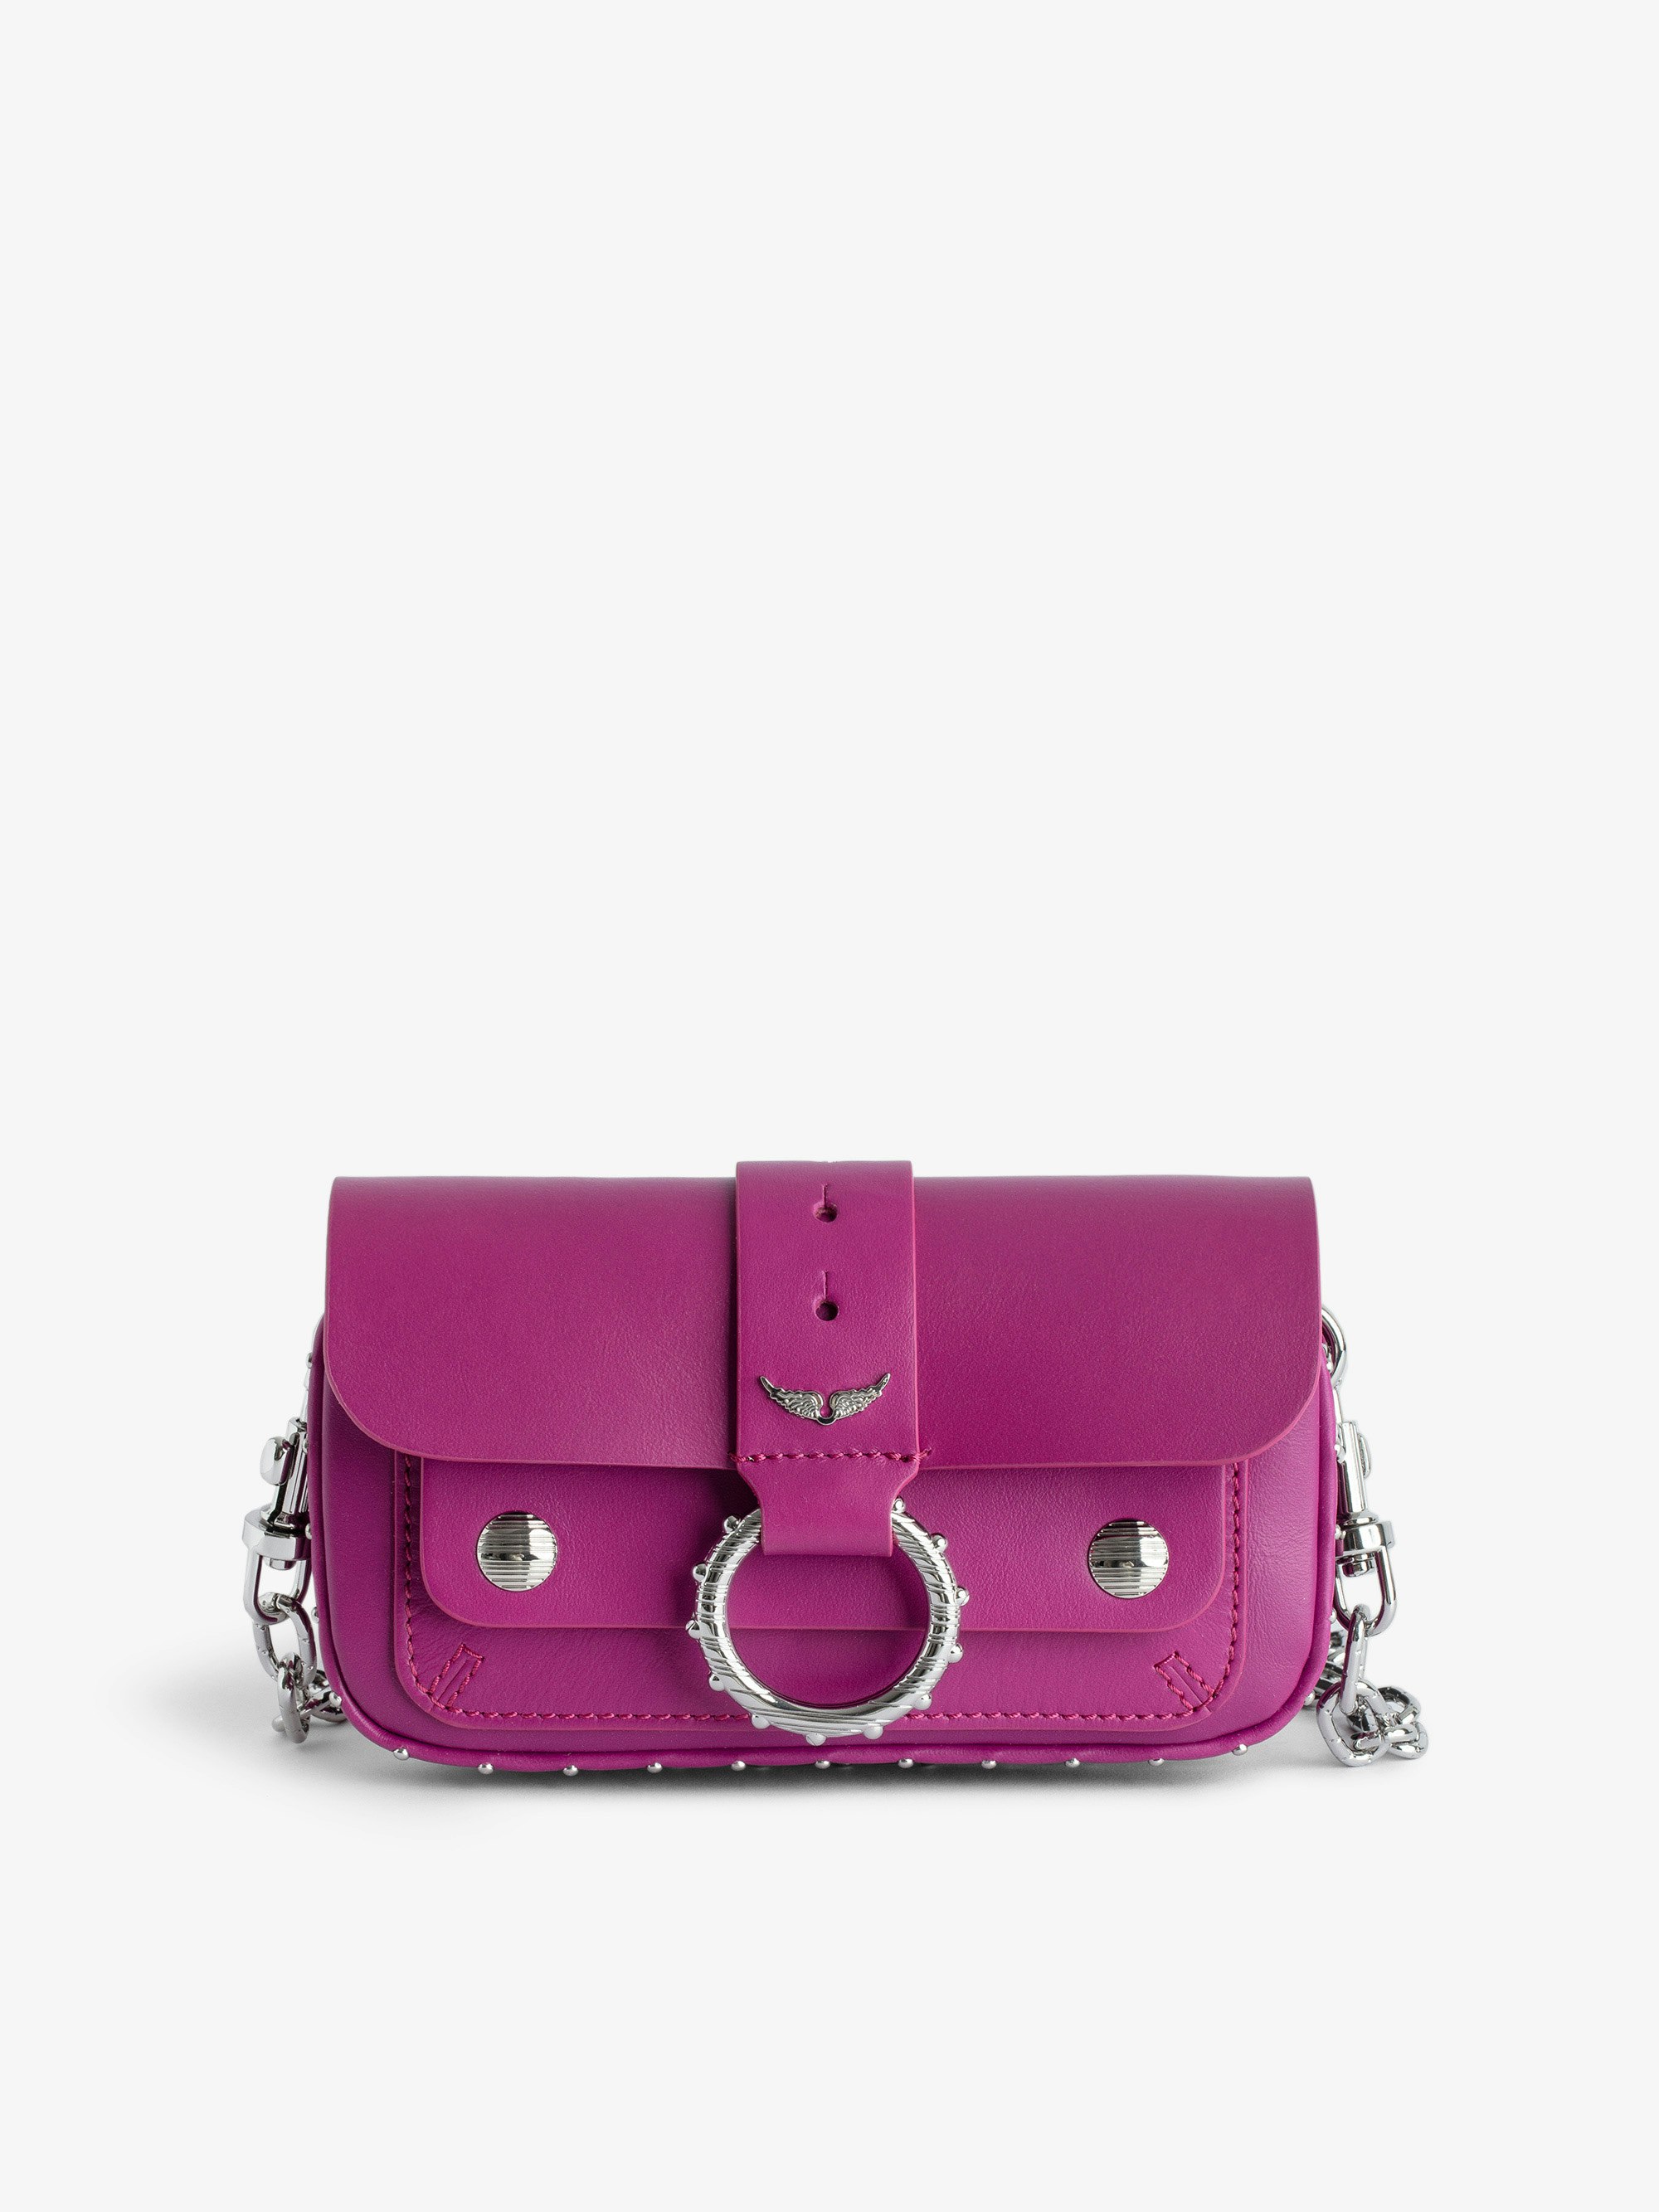 Kate Wallet Bag - Designed by Kate Moss for Zadig&Voltaire.  Fuschia smooth leather mini bag with ring and metal chain.